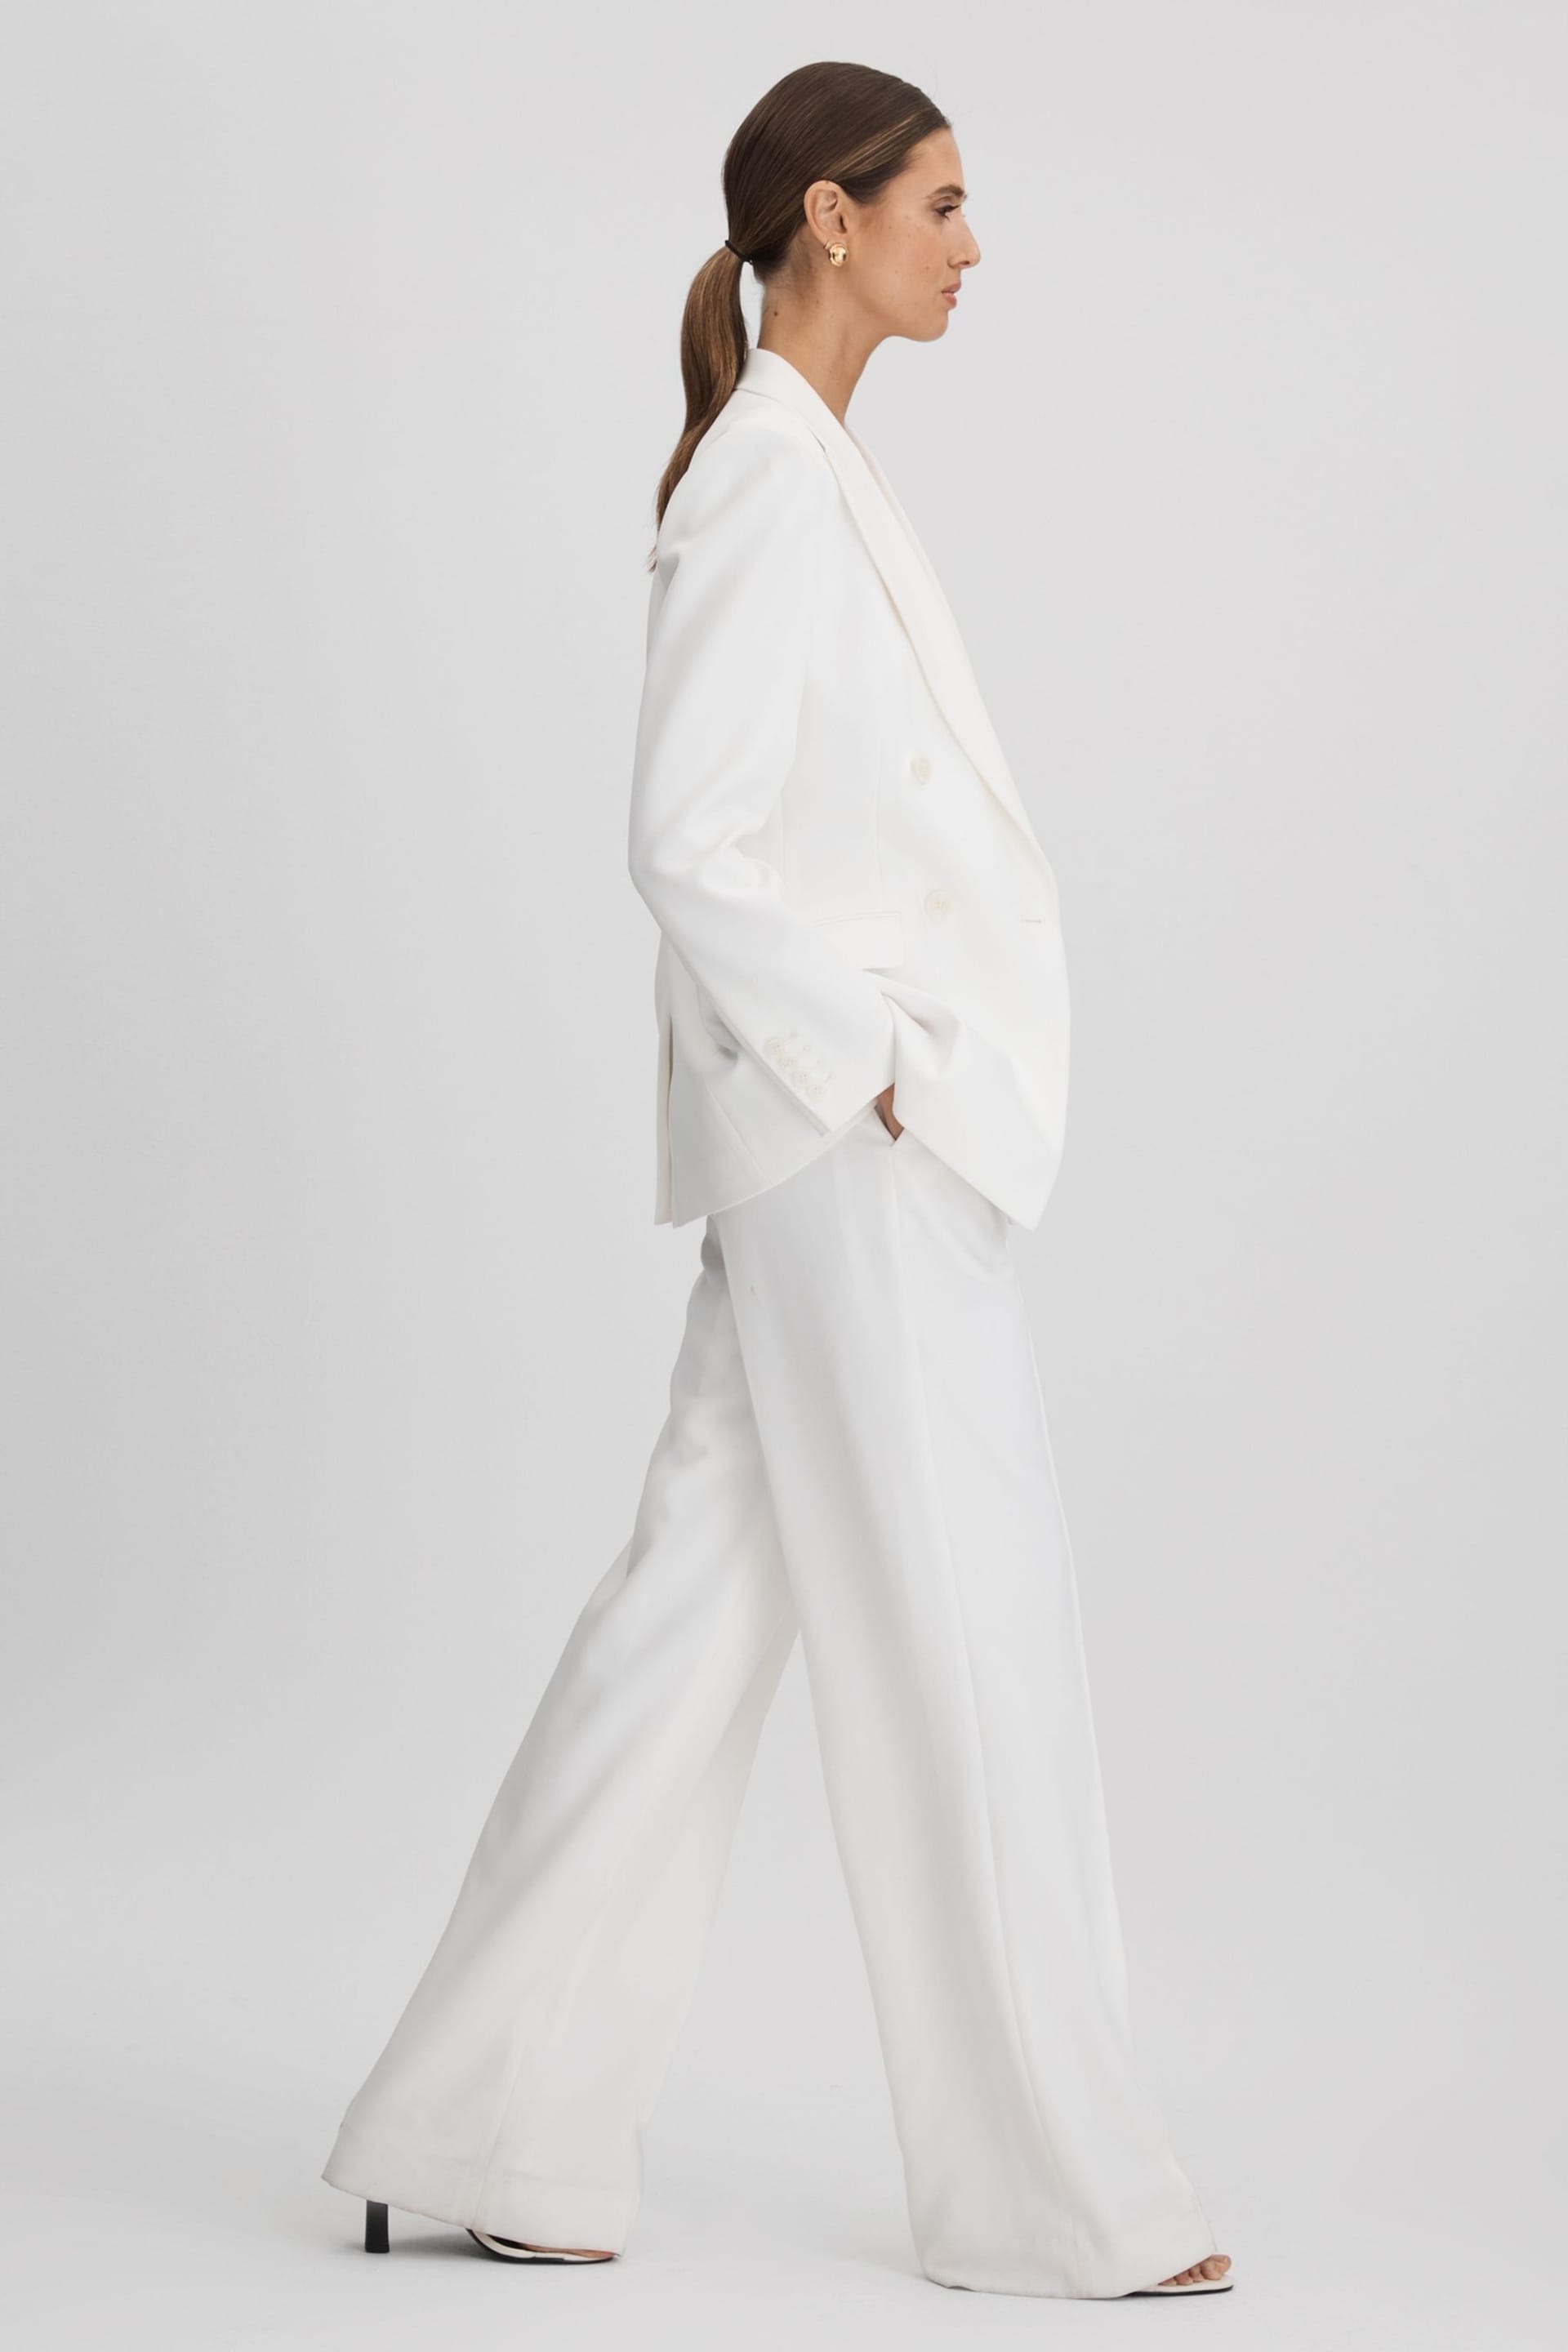 Reiss White Sienna Crepe Wide Leg Suit Trousers - Image 5 of 7